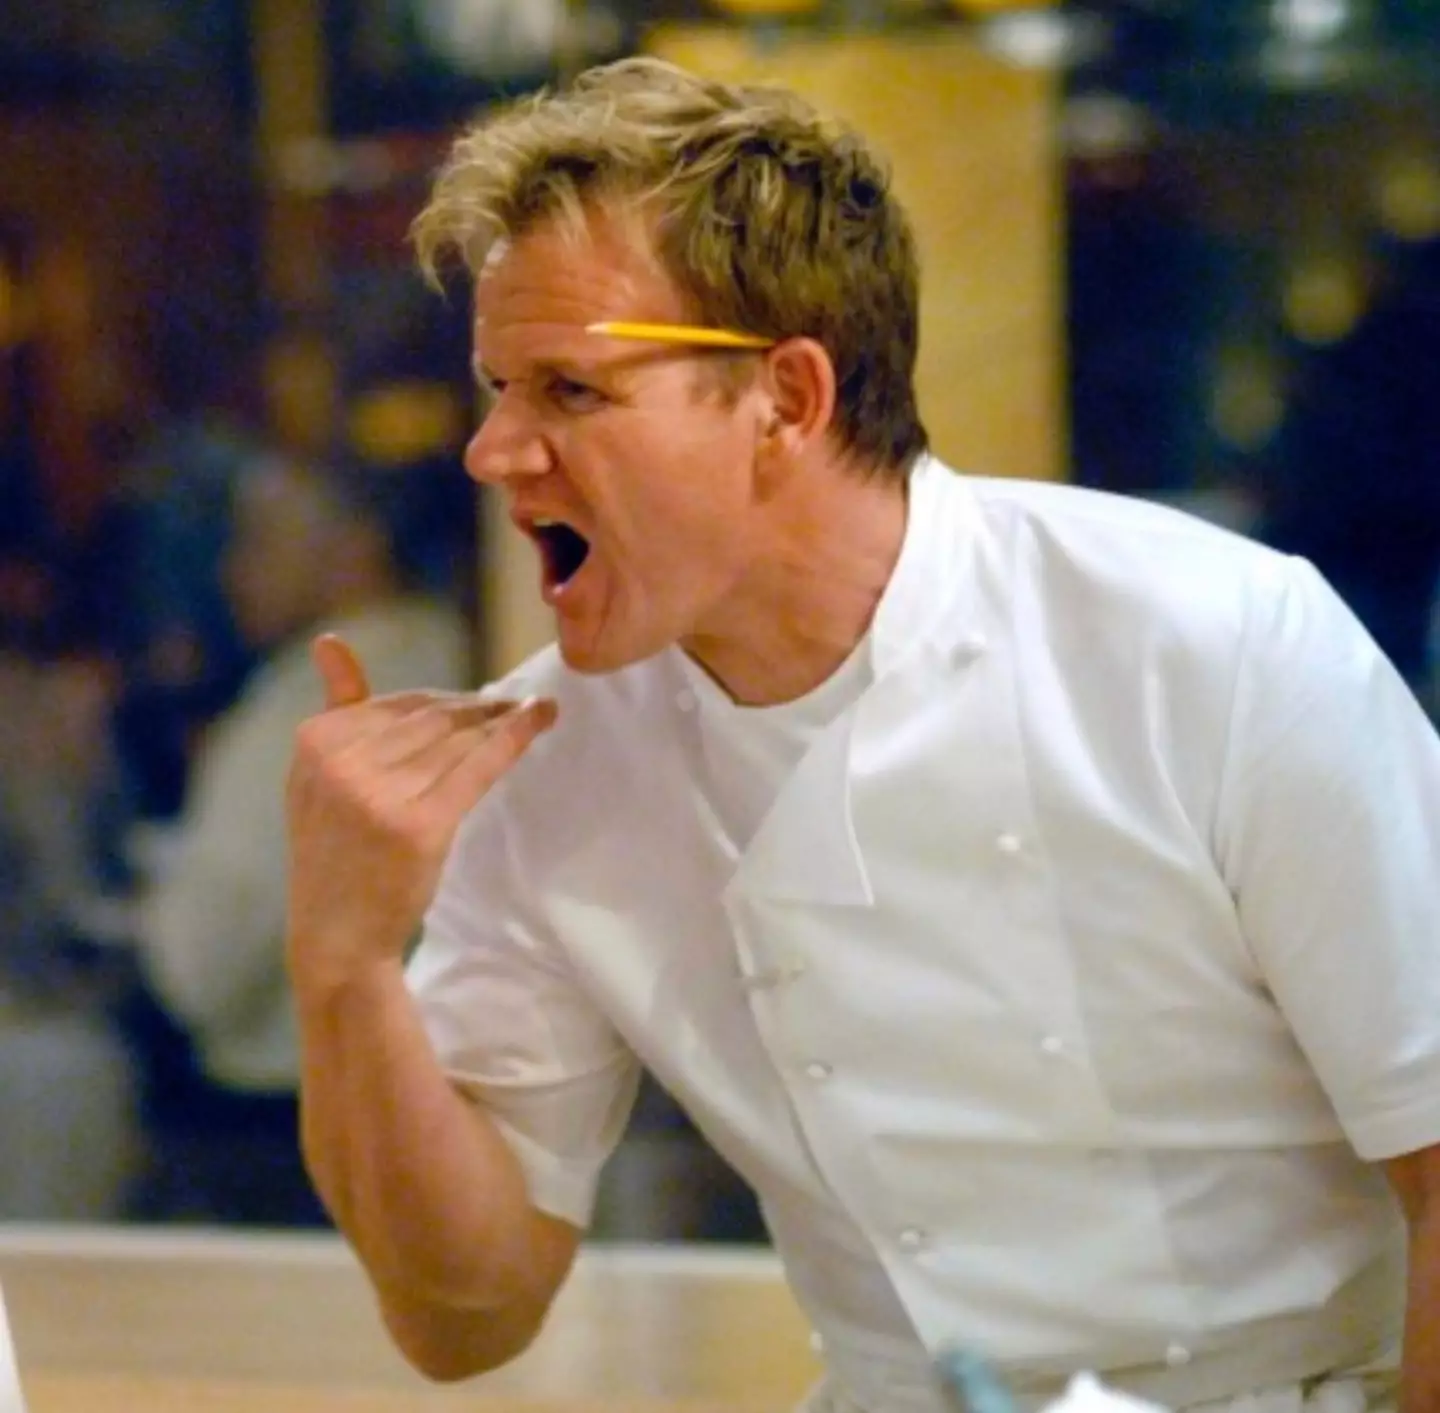 Gordon Ramsay says he's just passionate about his job and resents people saying he's on drugs.